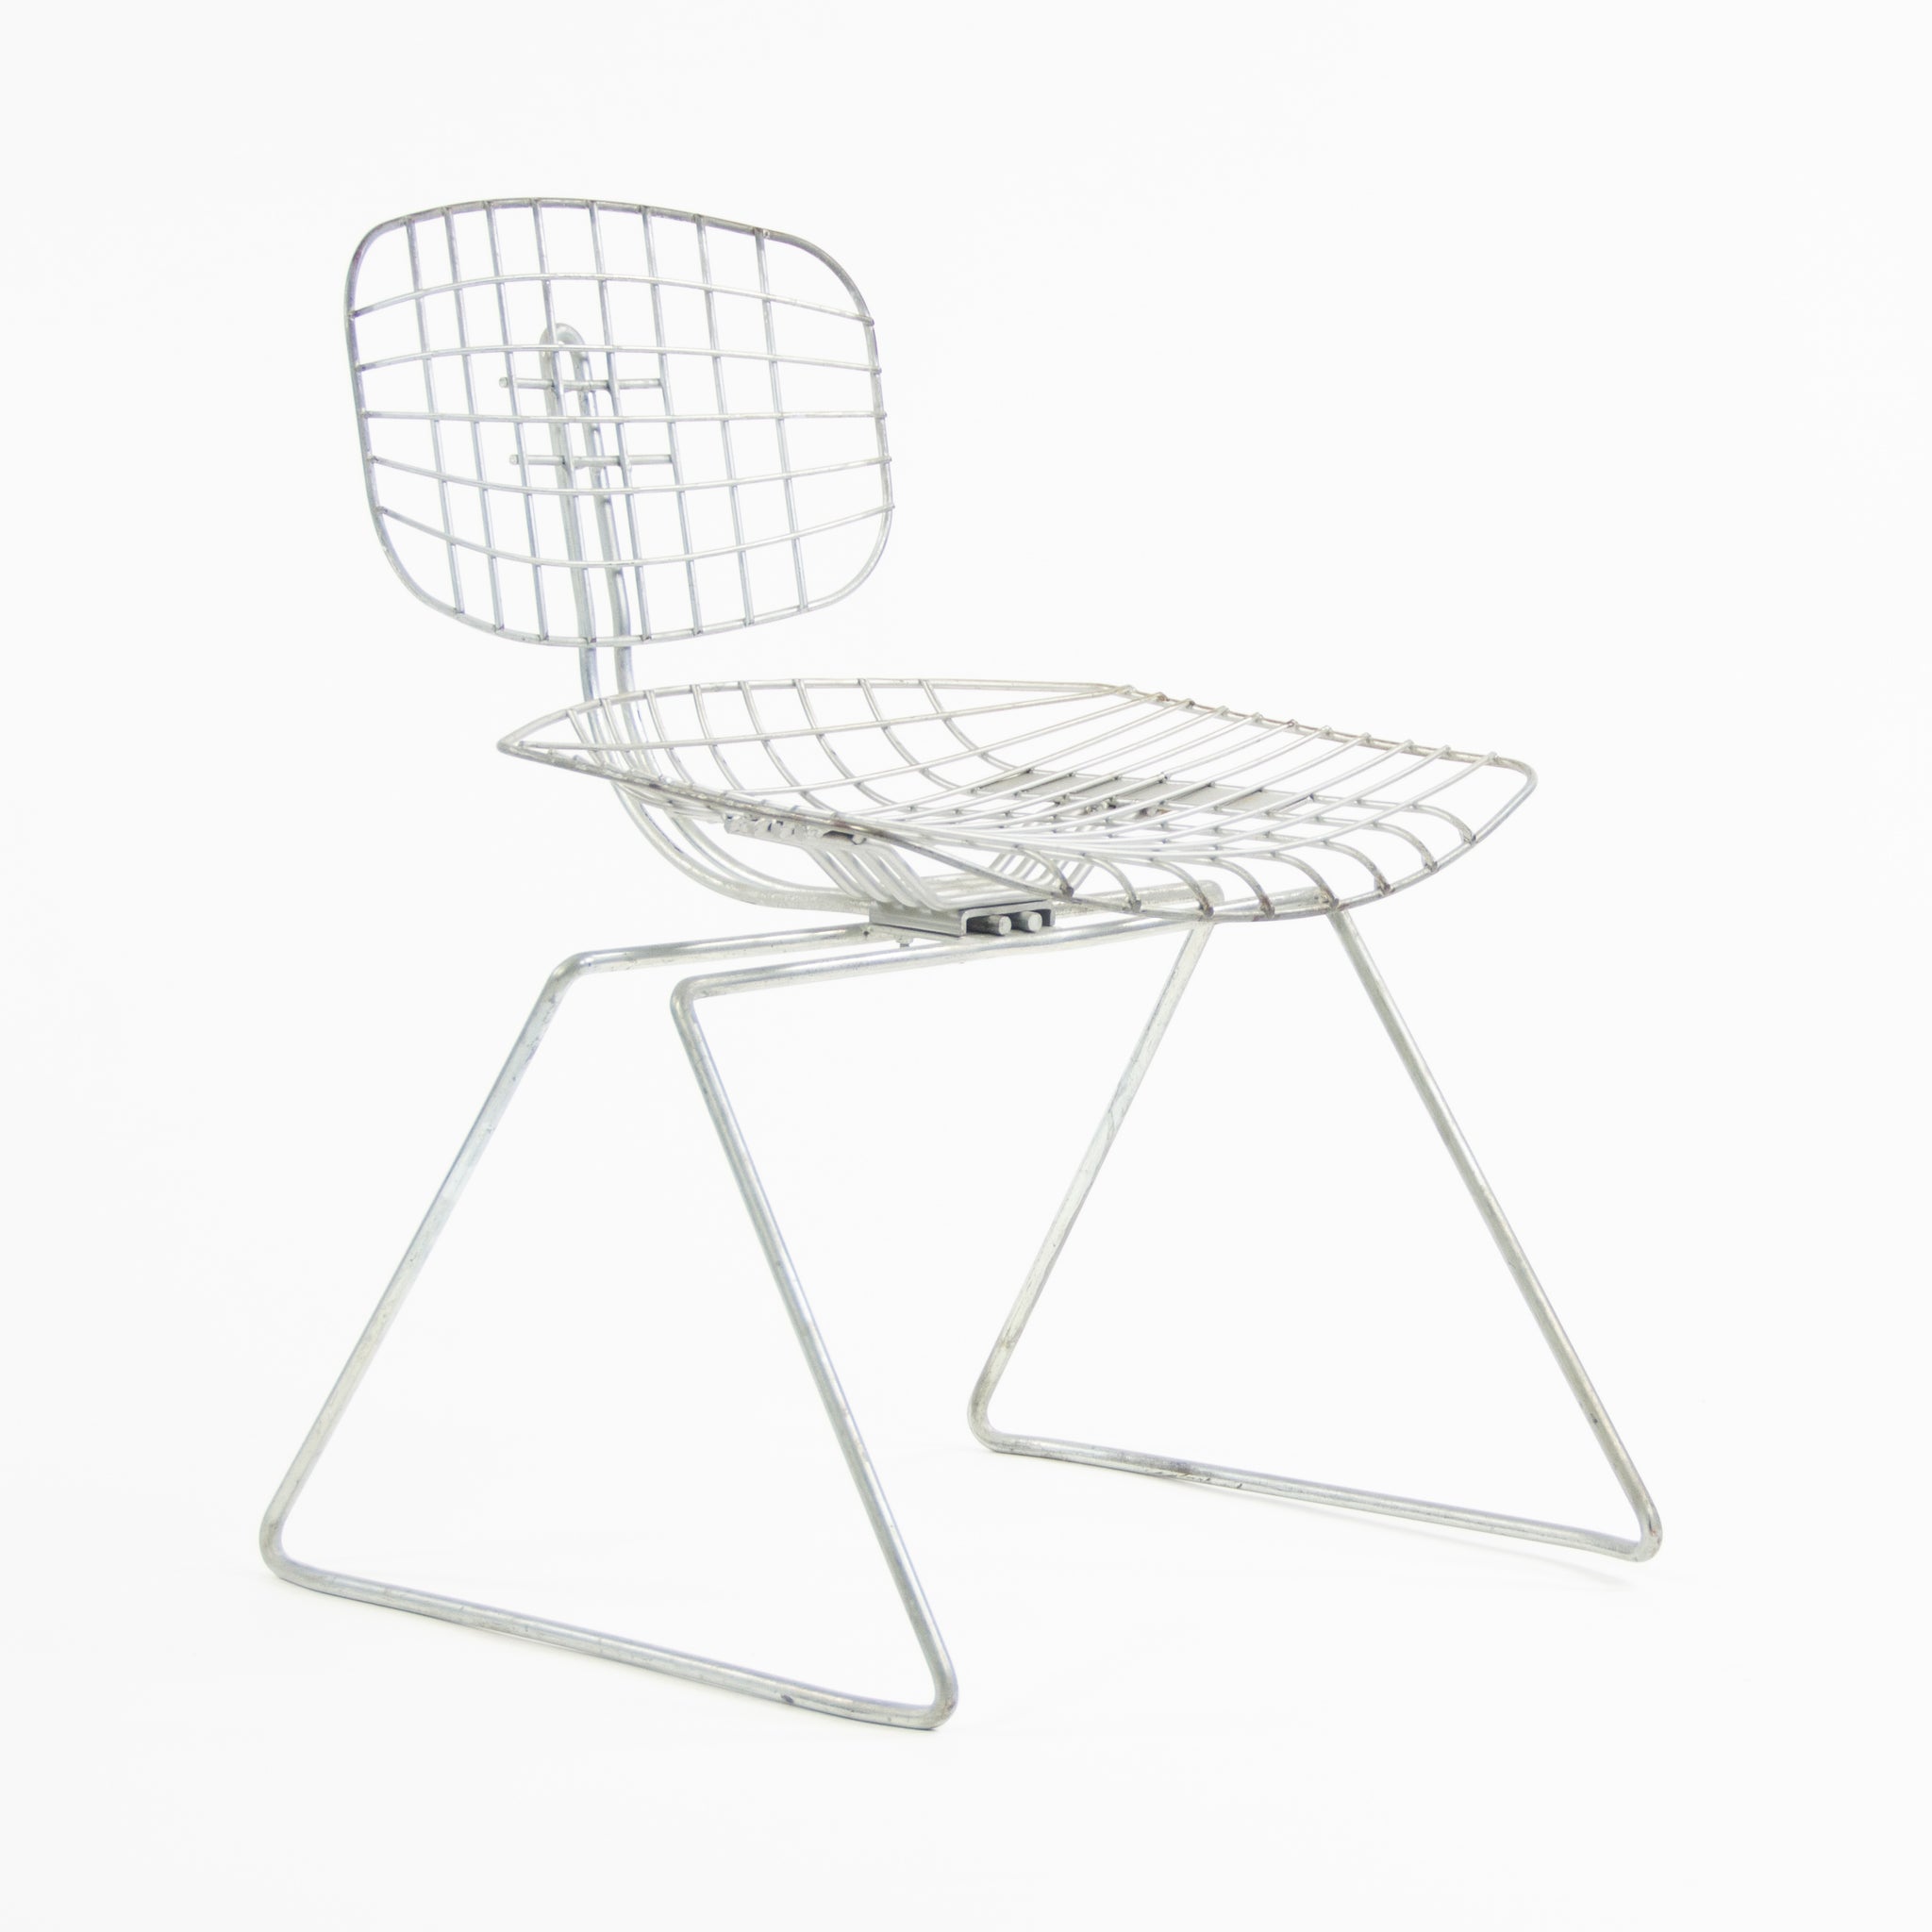 SOLD 1976 Michel Cadestin and Georges Laurent Beaubourg Chair Teda France Pompidou